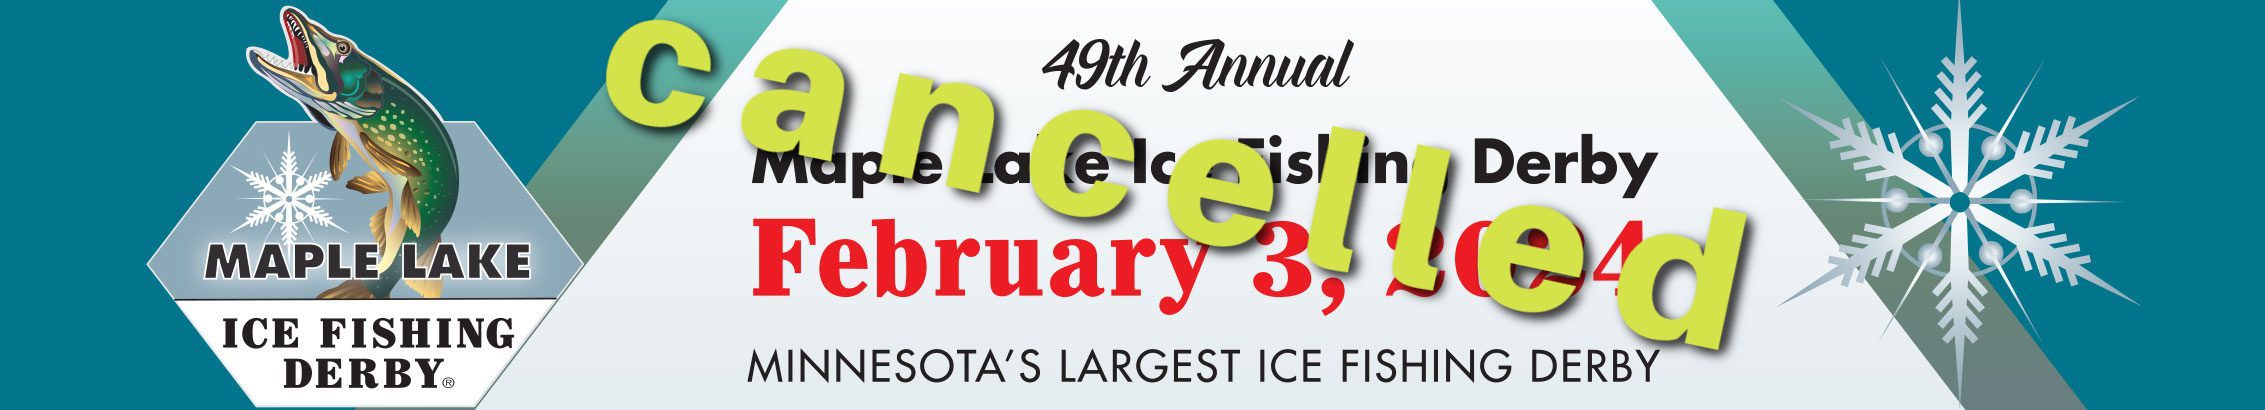 Maple Lake Fishing Derby Information and Details